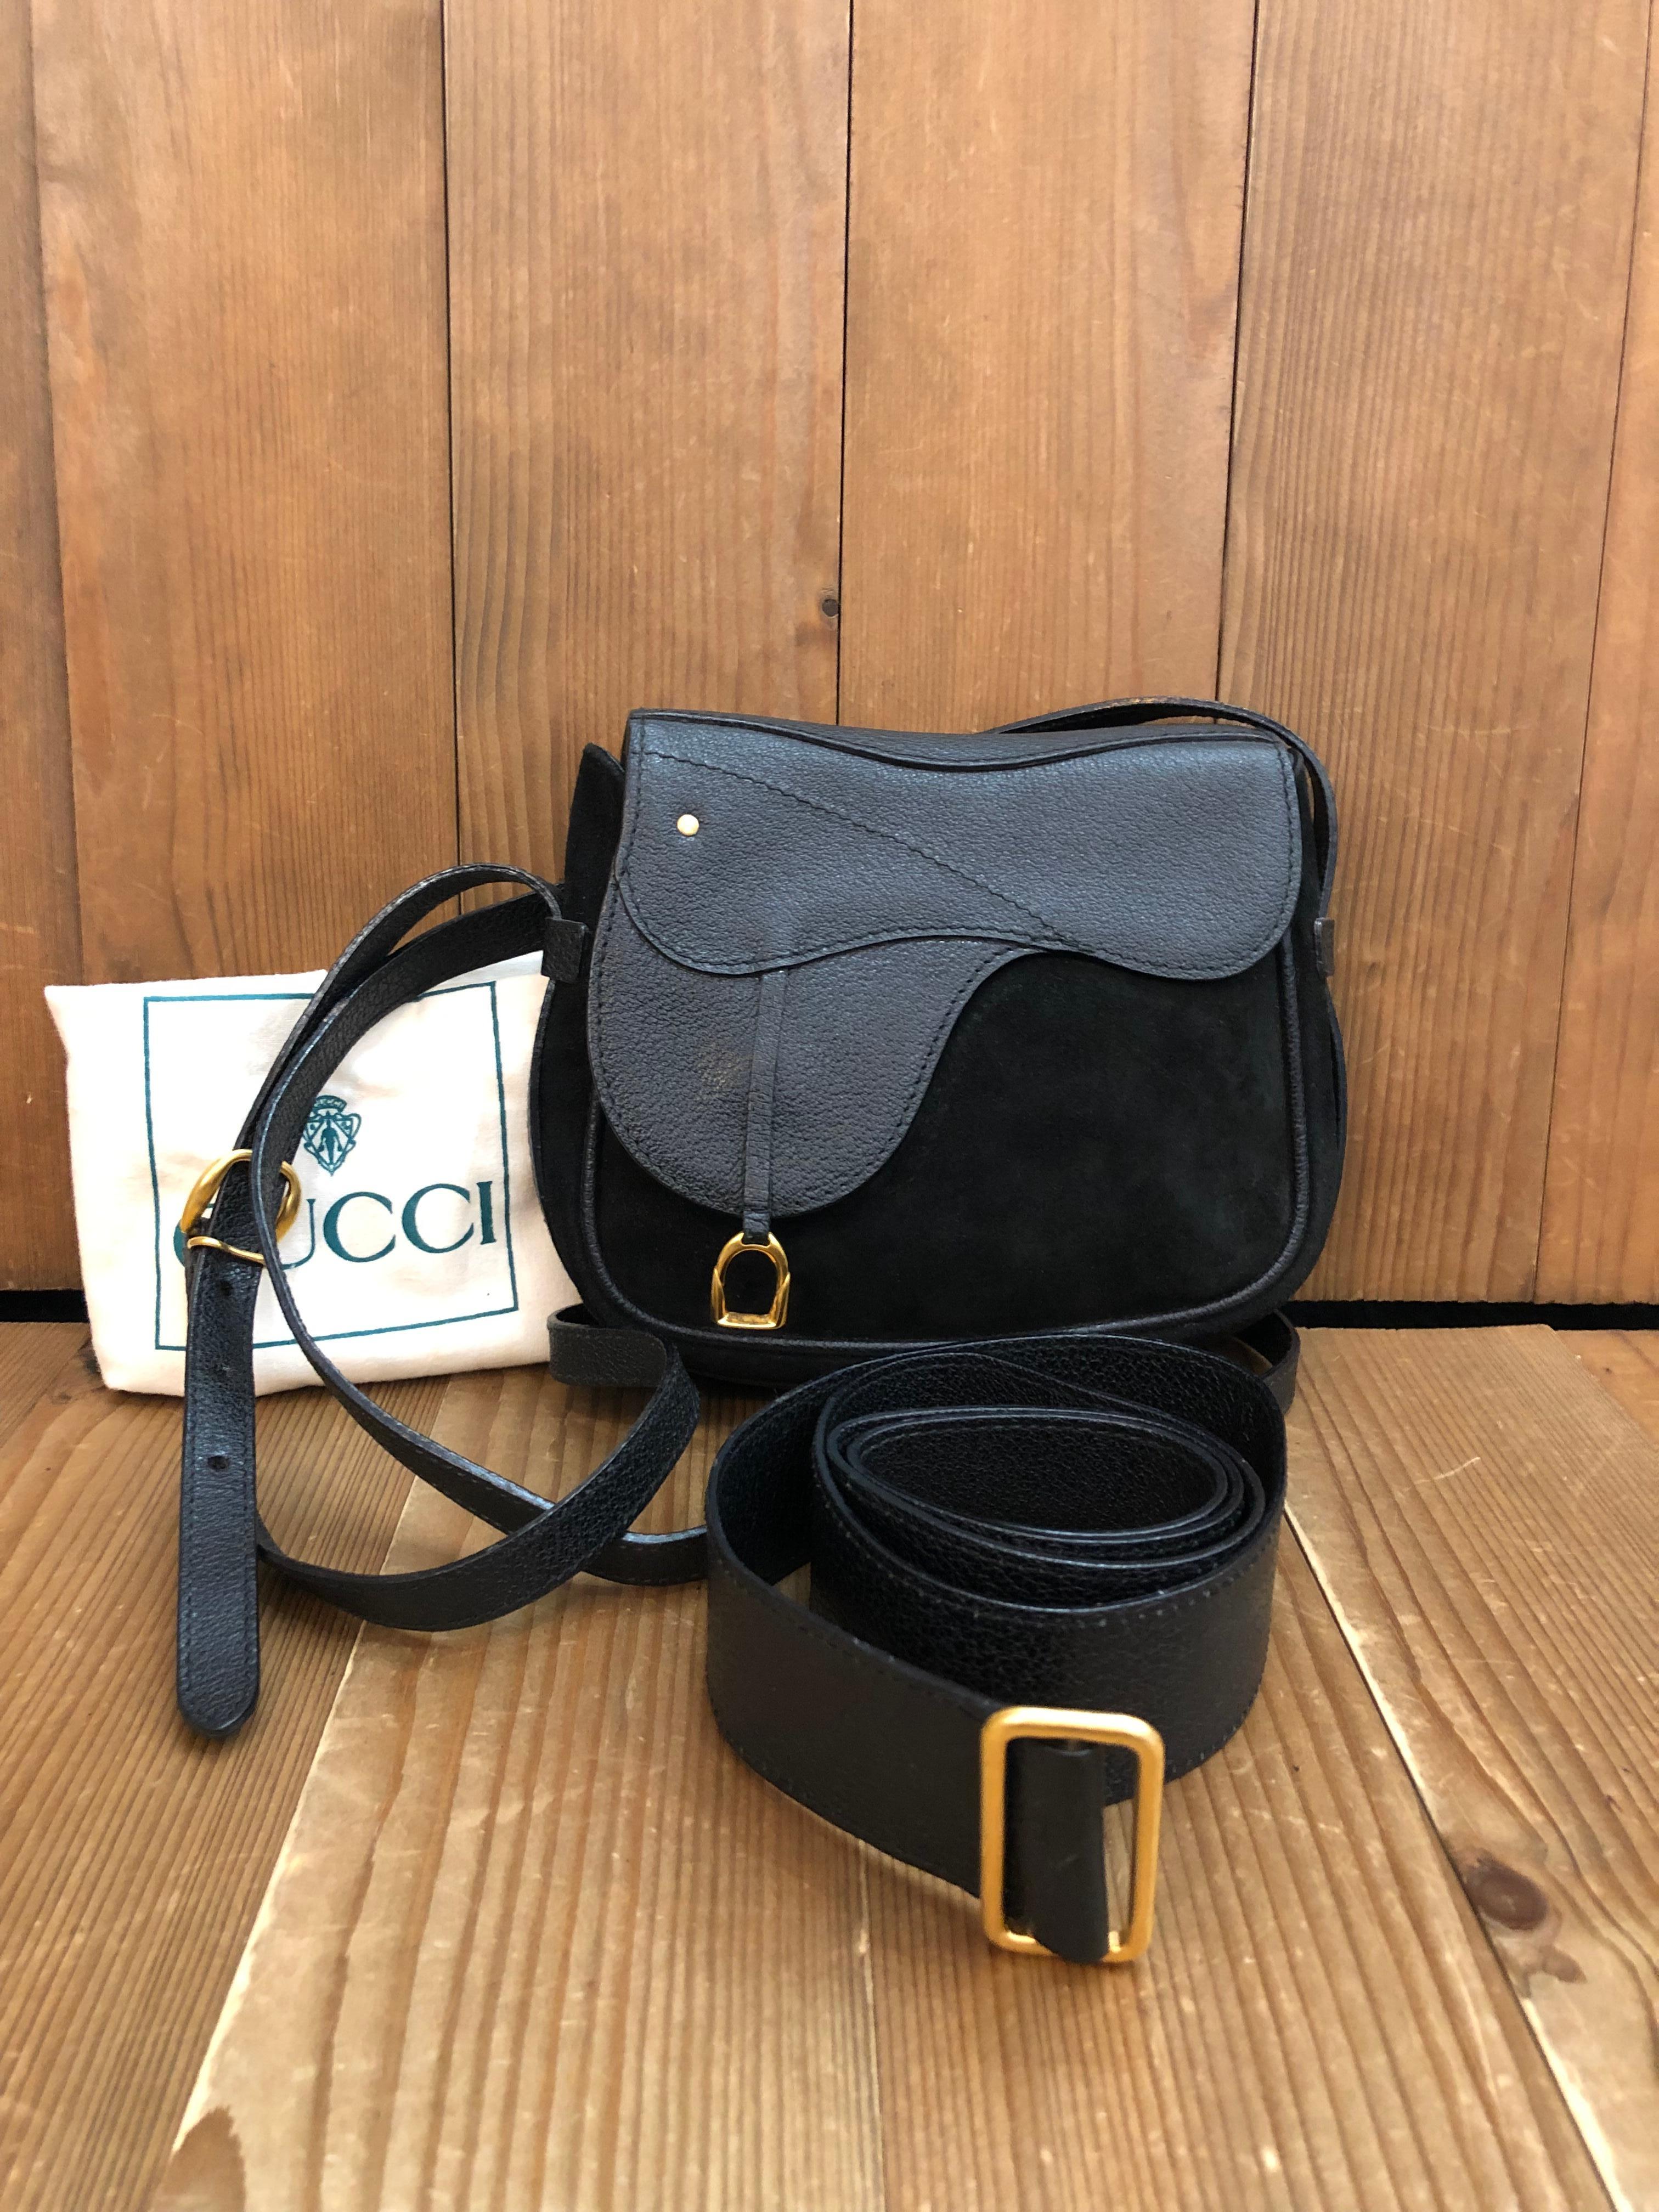 This vintage GUCCI mini saddle bag is crafted of pigskin and nubuck leather in black featuring gold toned hardware. This bag features a detachable crossbody strap and a belt of the same leather for wearing it as a crossbody or belt bag. Front